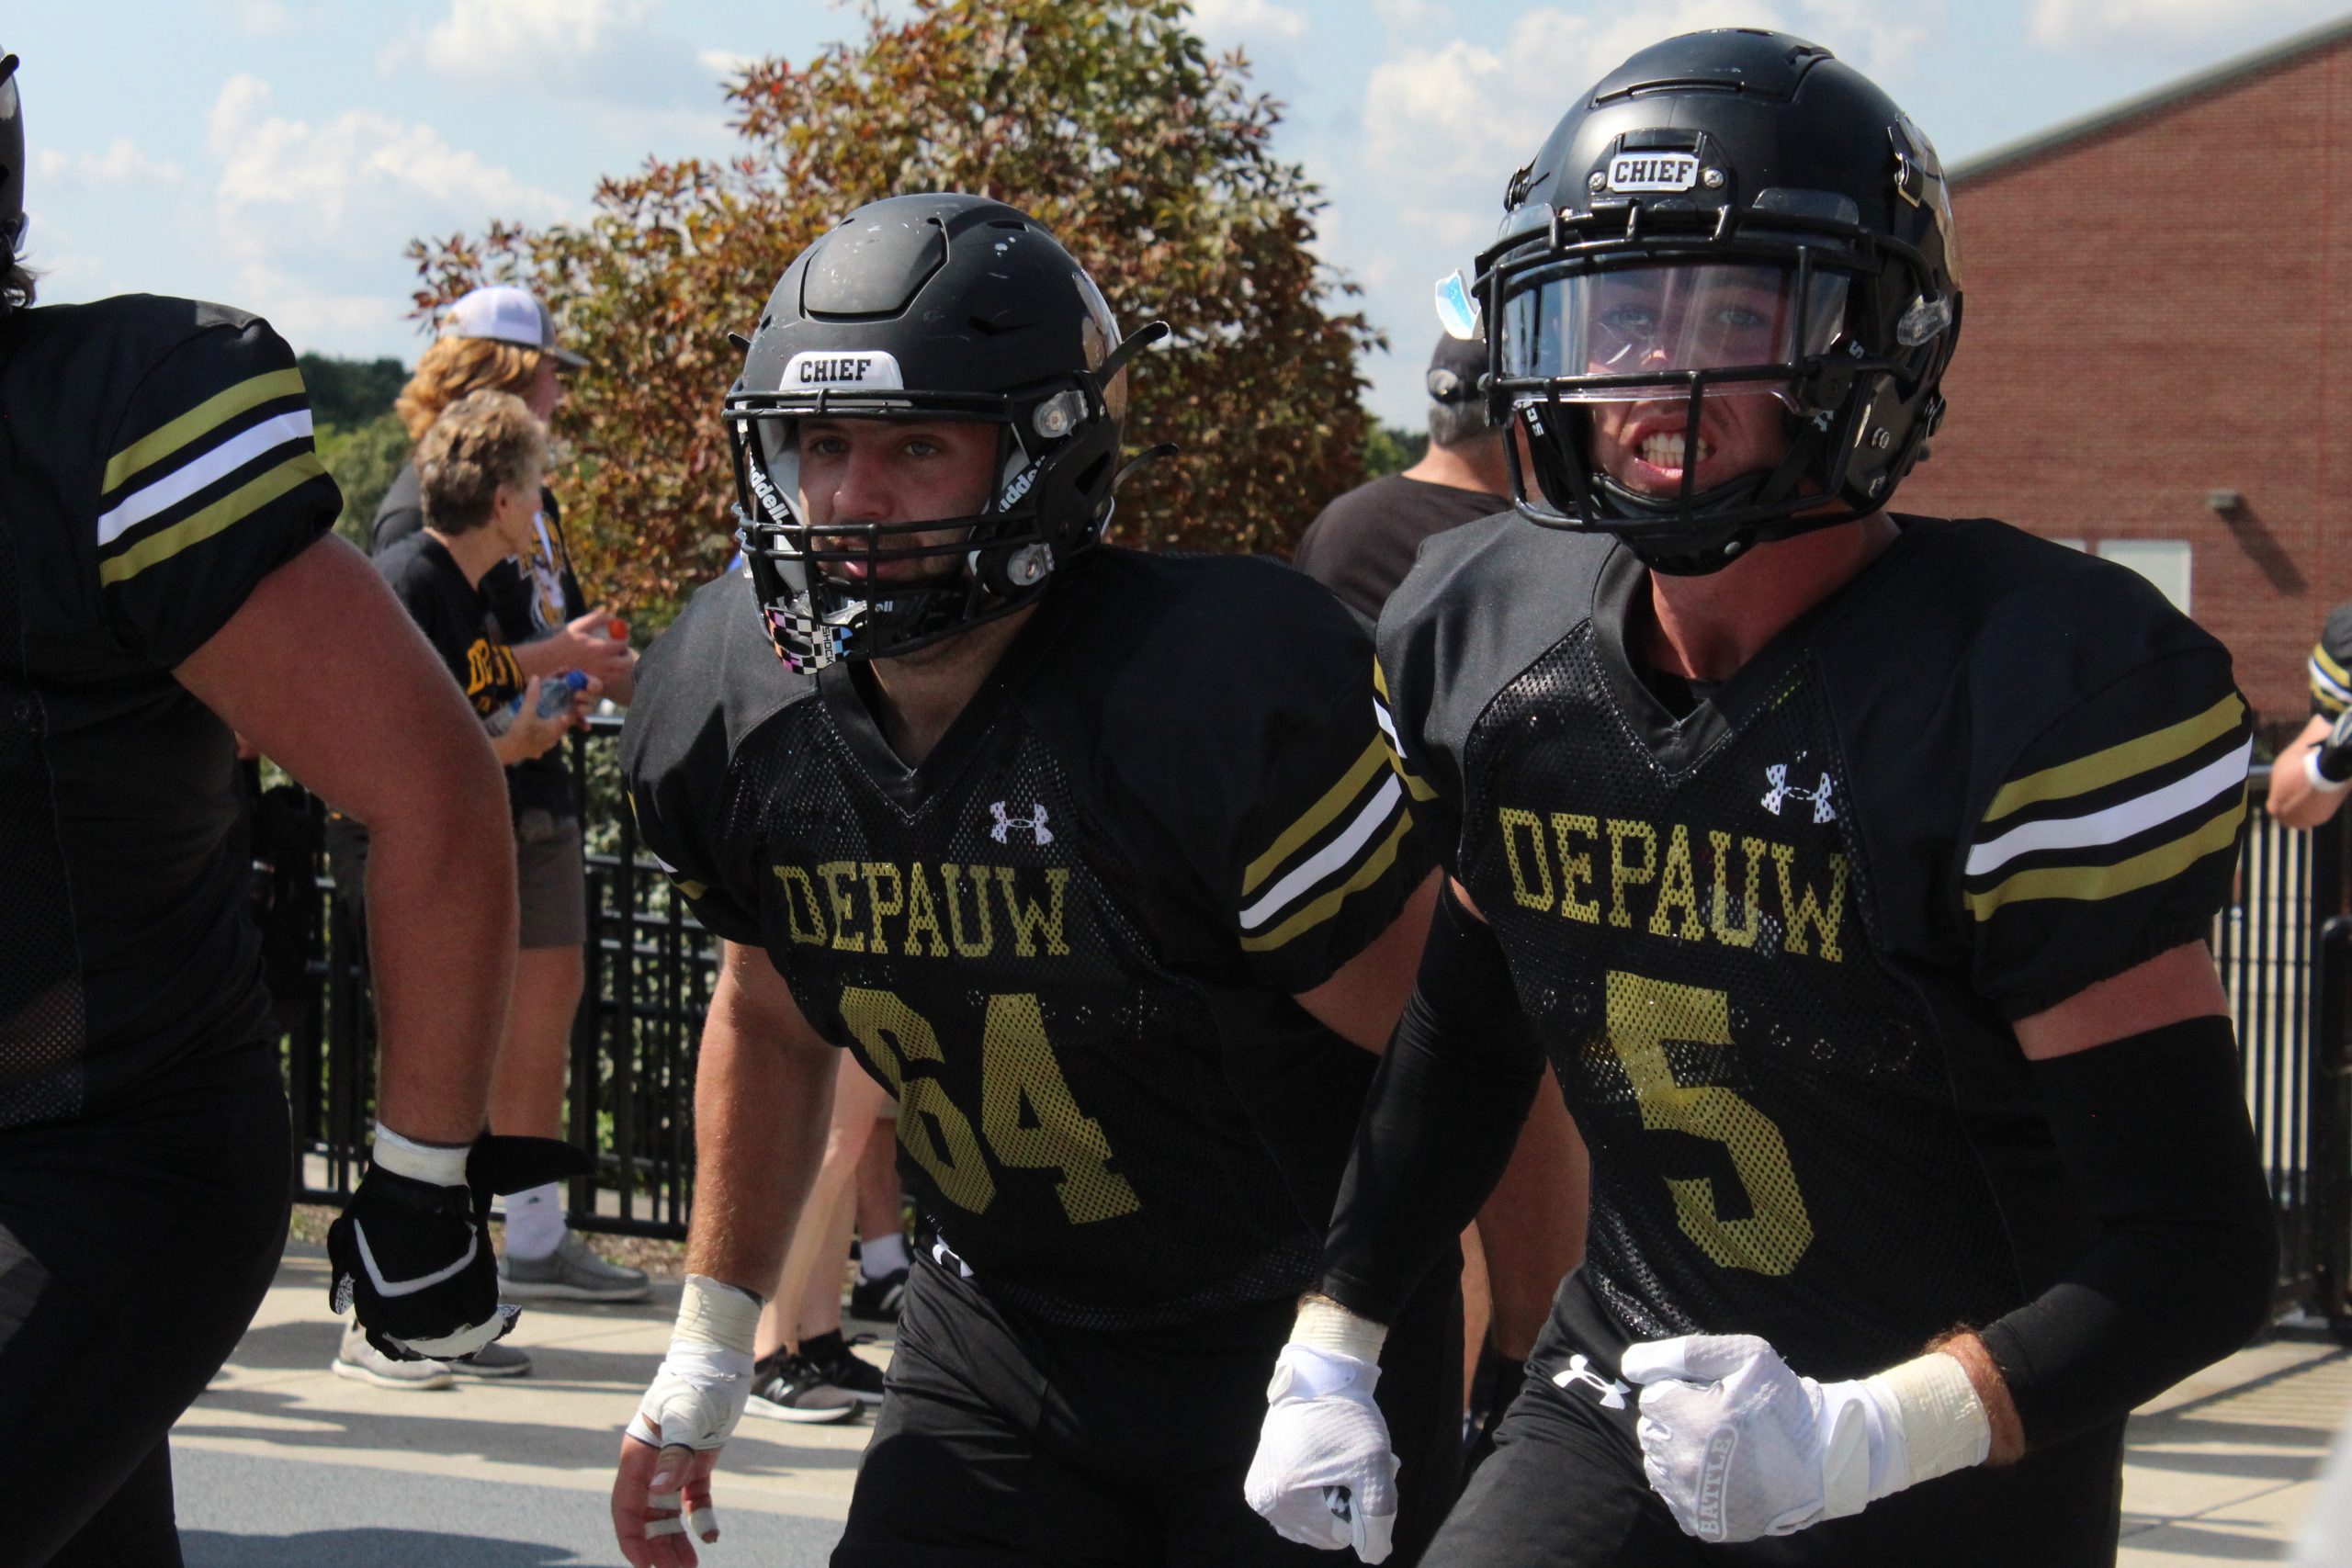 DePauw Football Defeats RoseHulman in First Round of Playoffs The DePauw